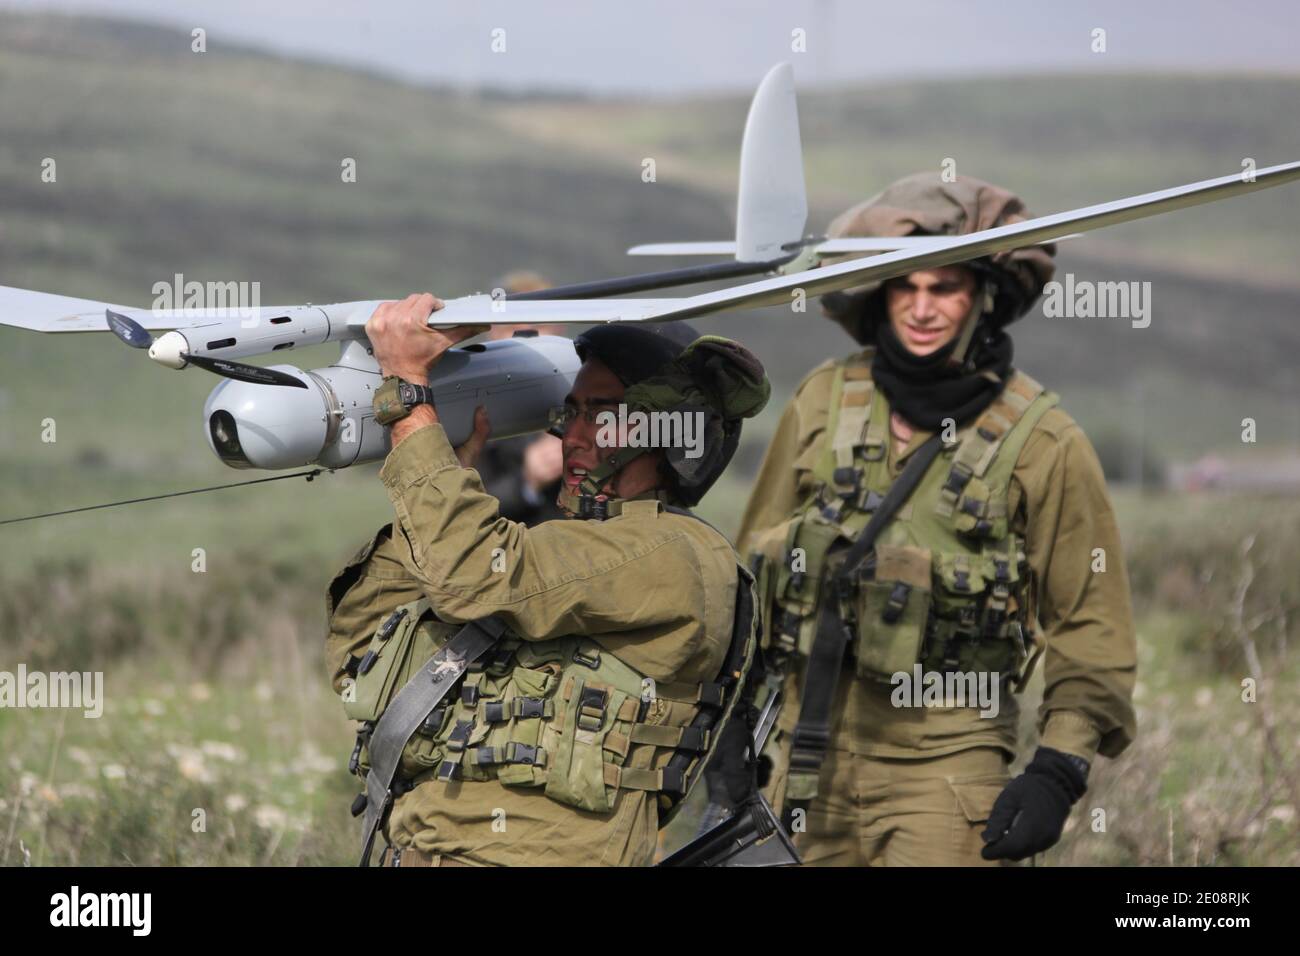 An Israeli soldier launches the Skylark drone during drill near Bat Shlomo, Israel on January 16, 2012. The Skylark can carry a camera payload of up to has an operational